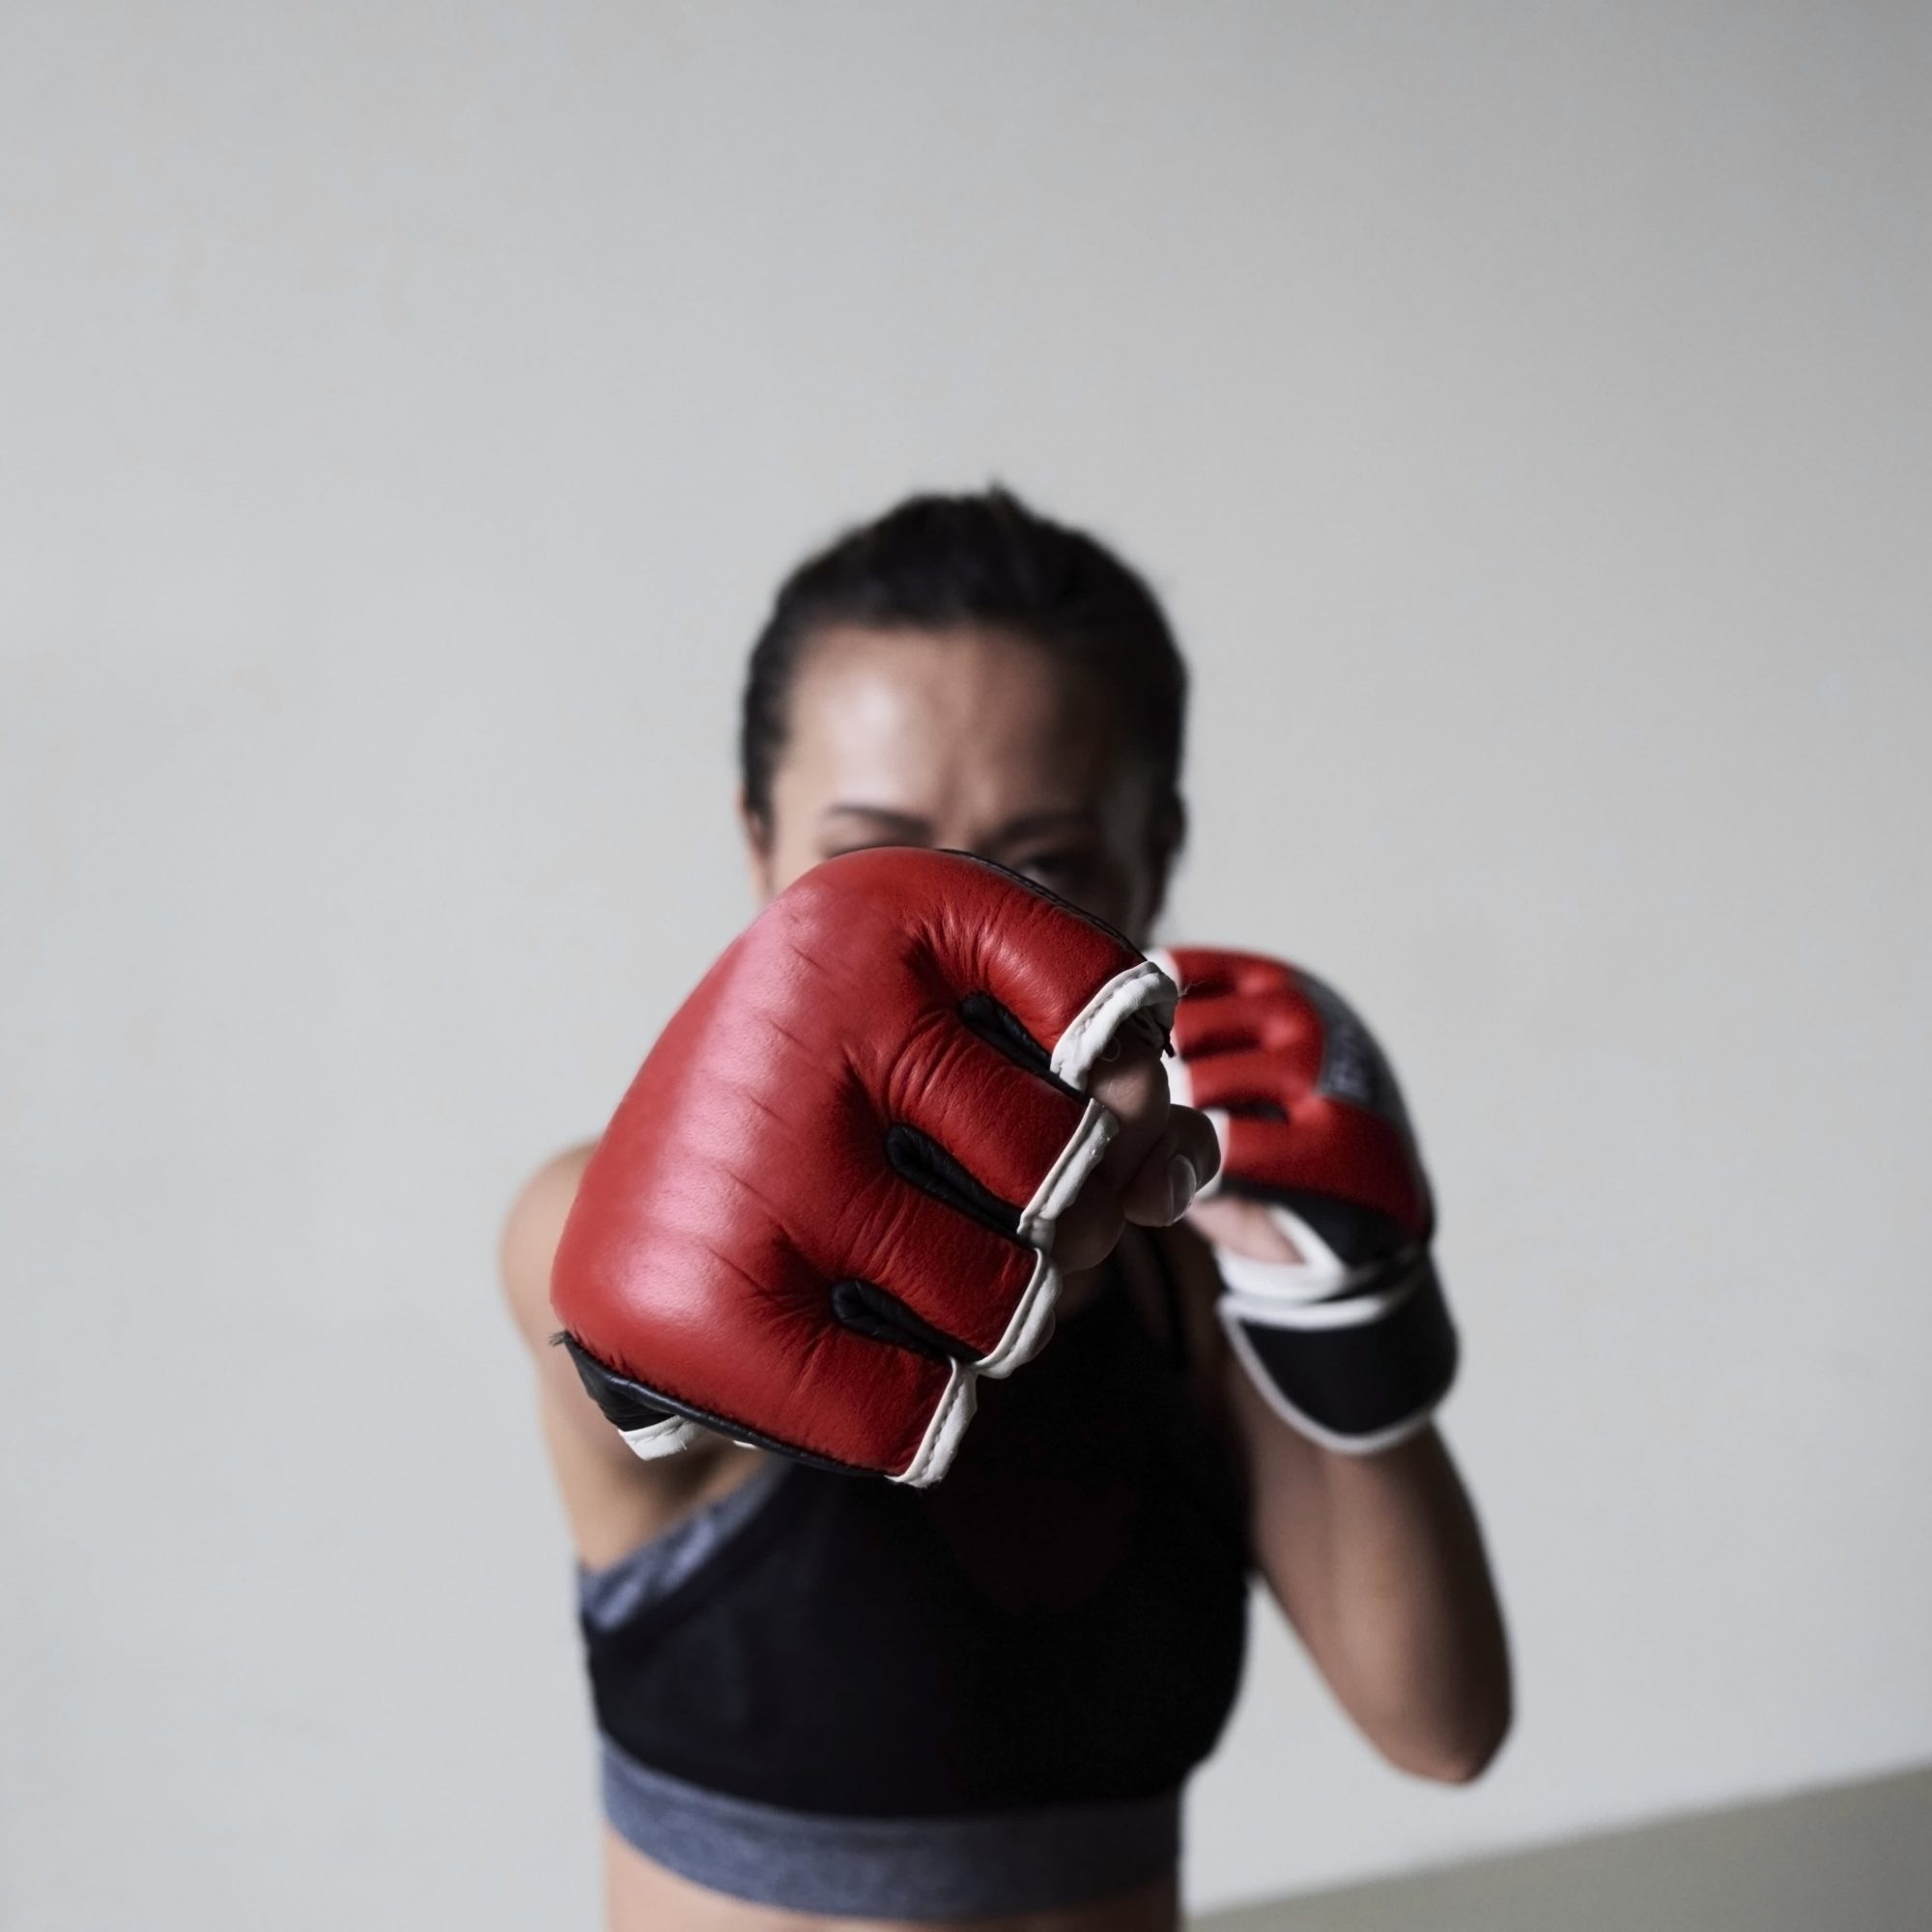 Free Boxing Workouts to Jab Out Your Stress and Build Strength at Home